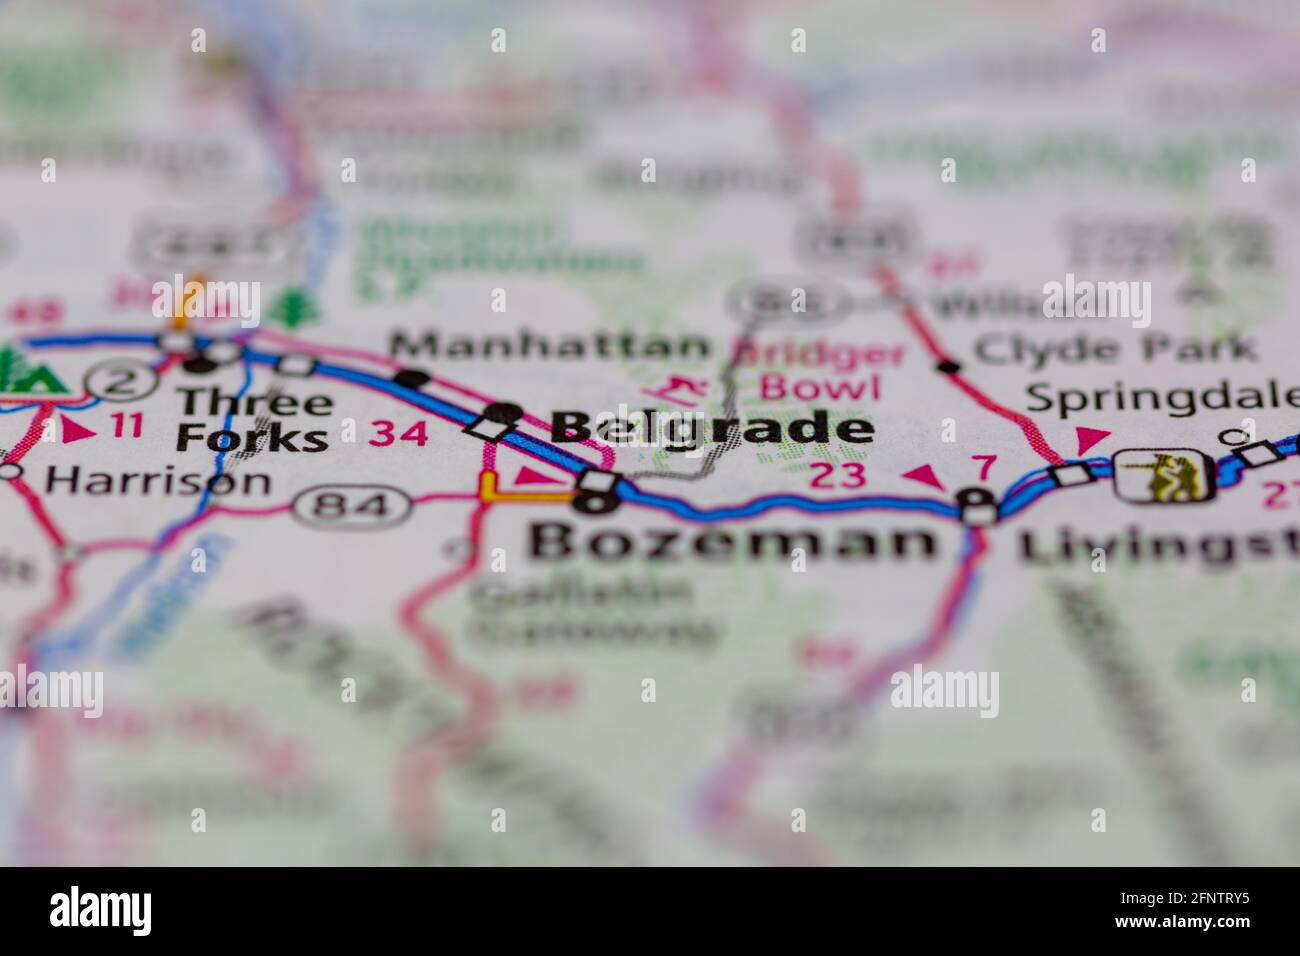 Belgrade Montana Usa Shown On A Geography Map Or Road Map 2FNTRY5 